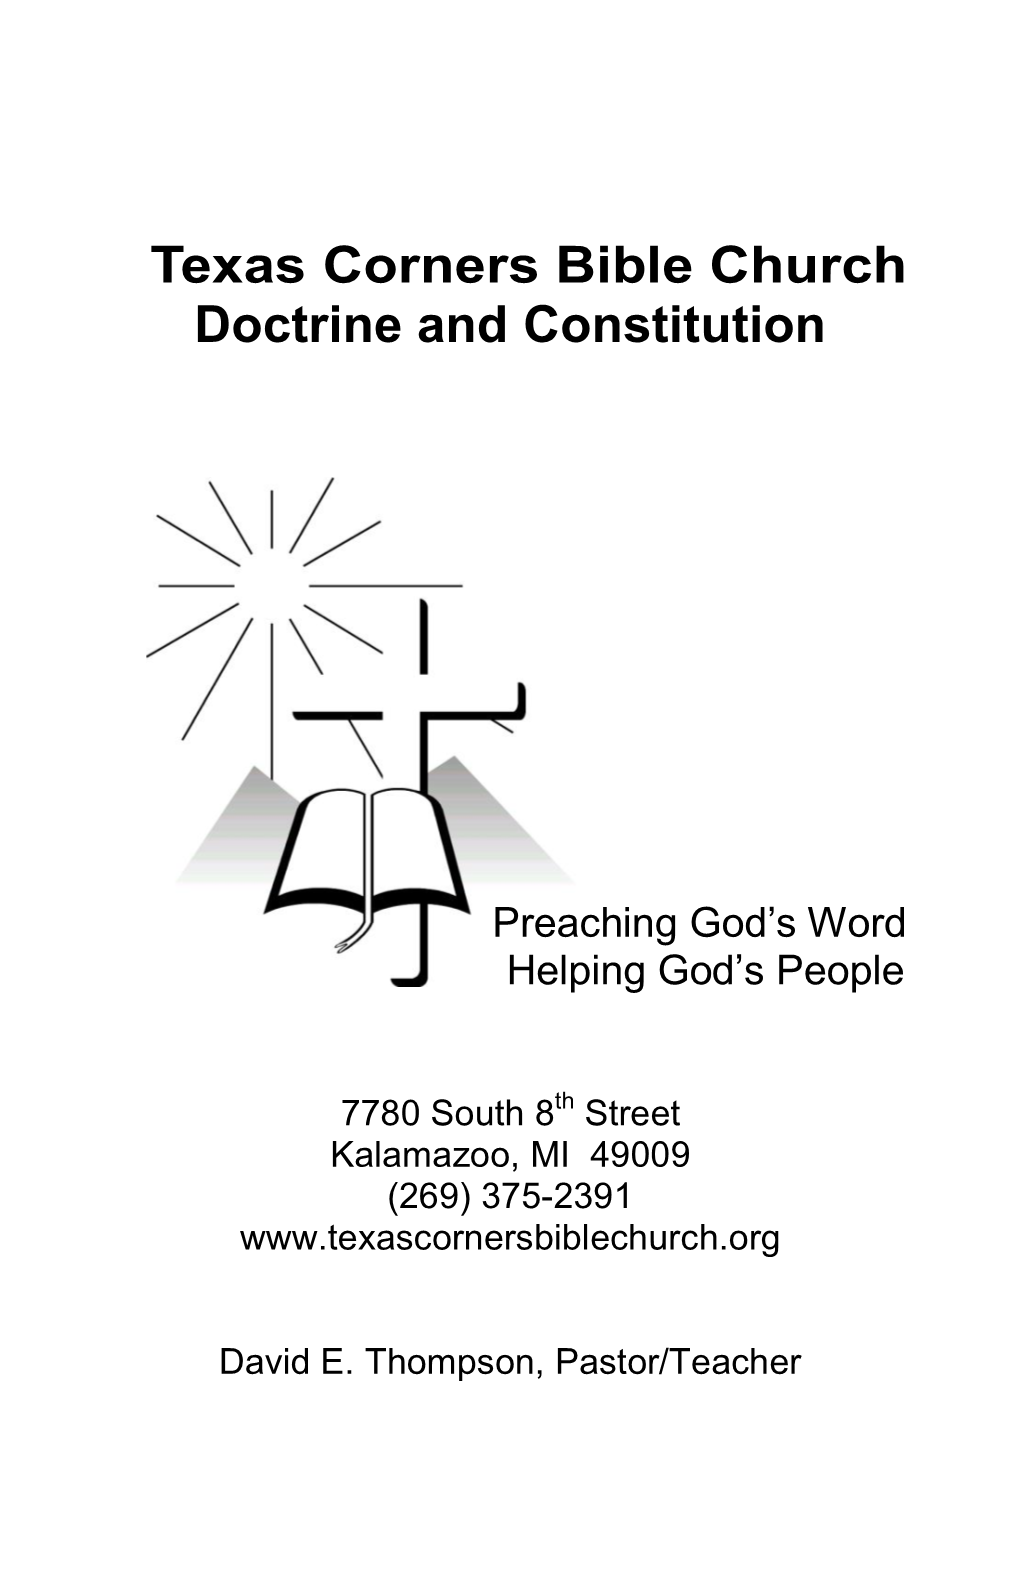 Texas Corners Bible Church Doctrine and Constitution